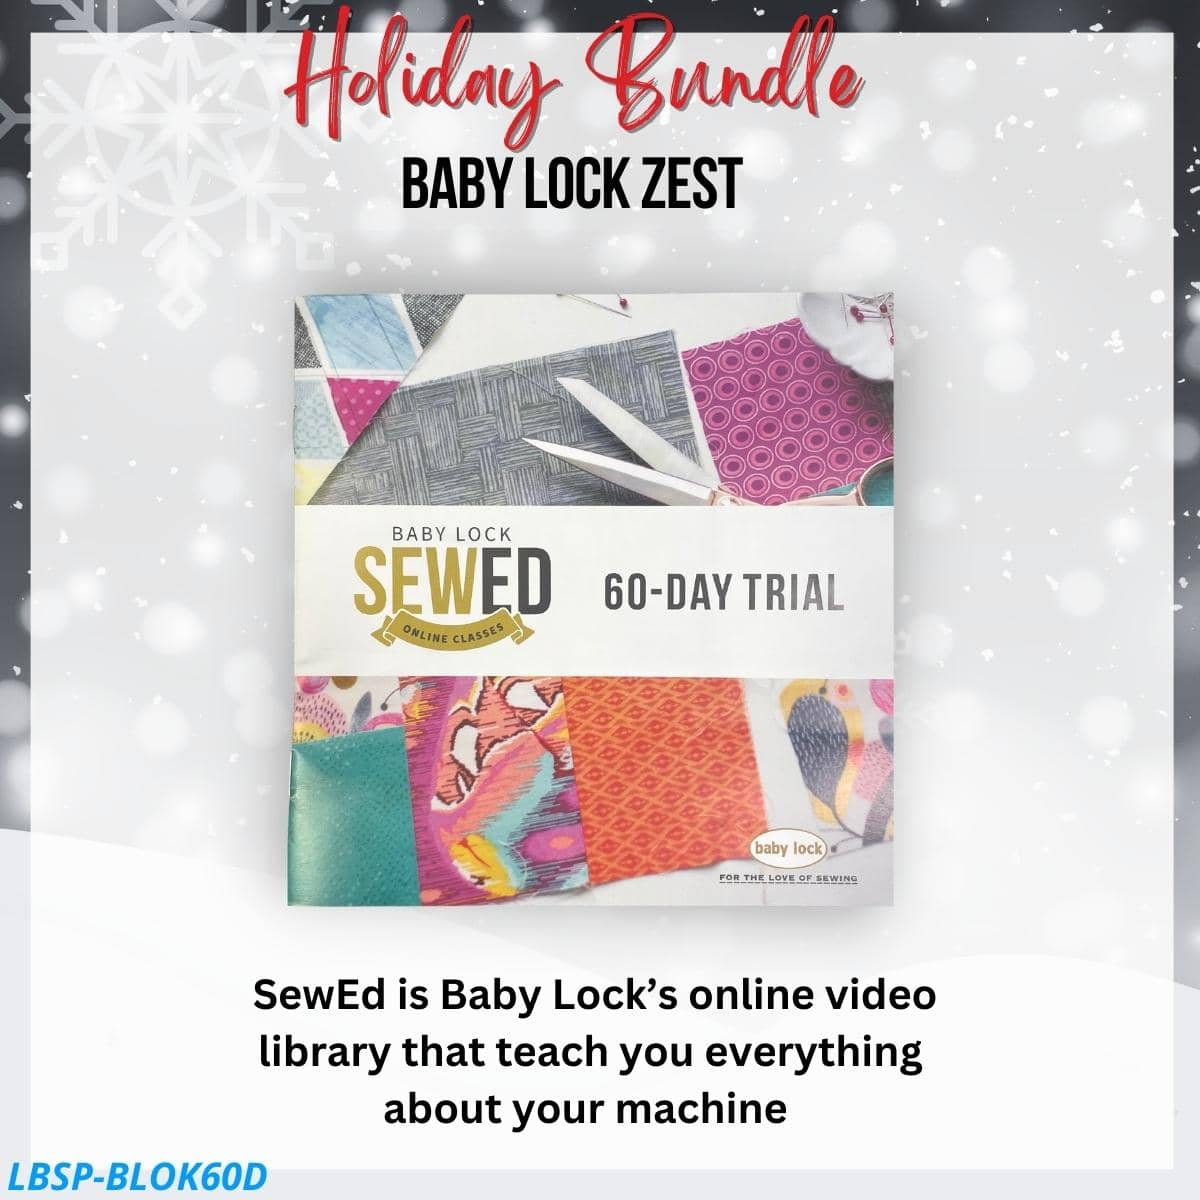 Baby Lock Zest Bundle for holiday sale